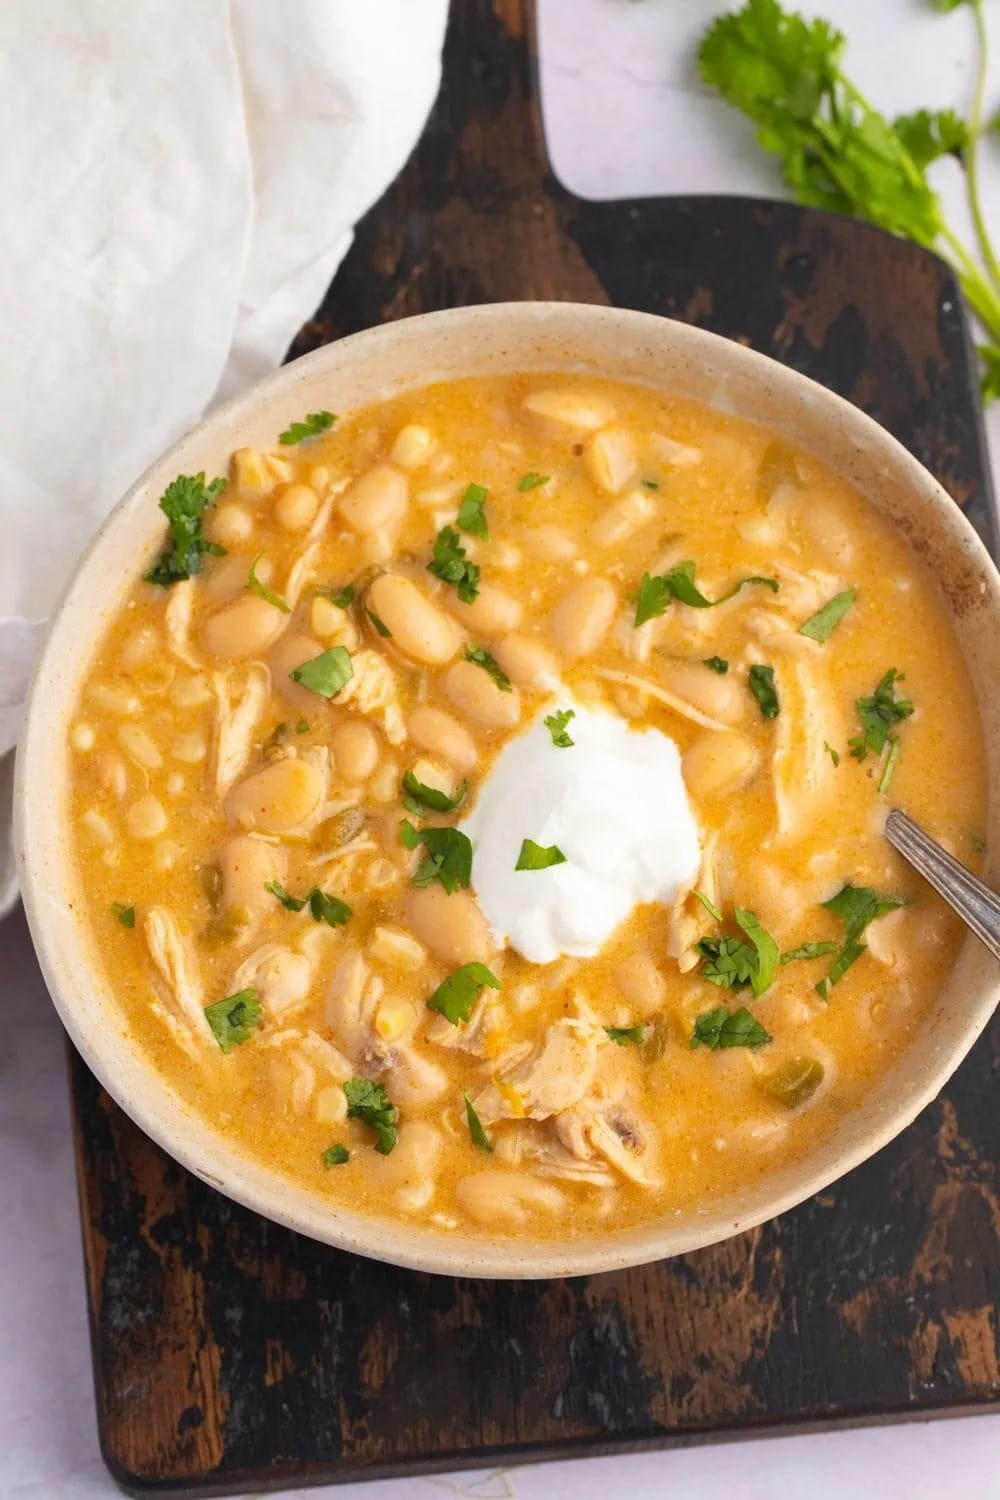 Crockpot White Chicken Chili with Sour Cream and Herbs in a Bowl